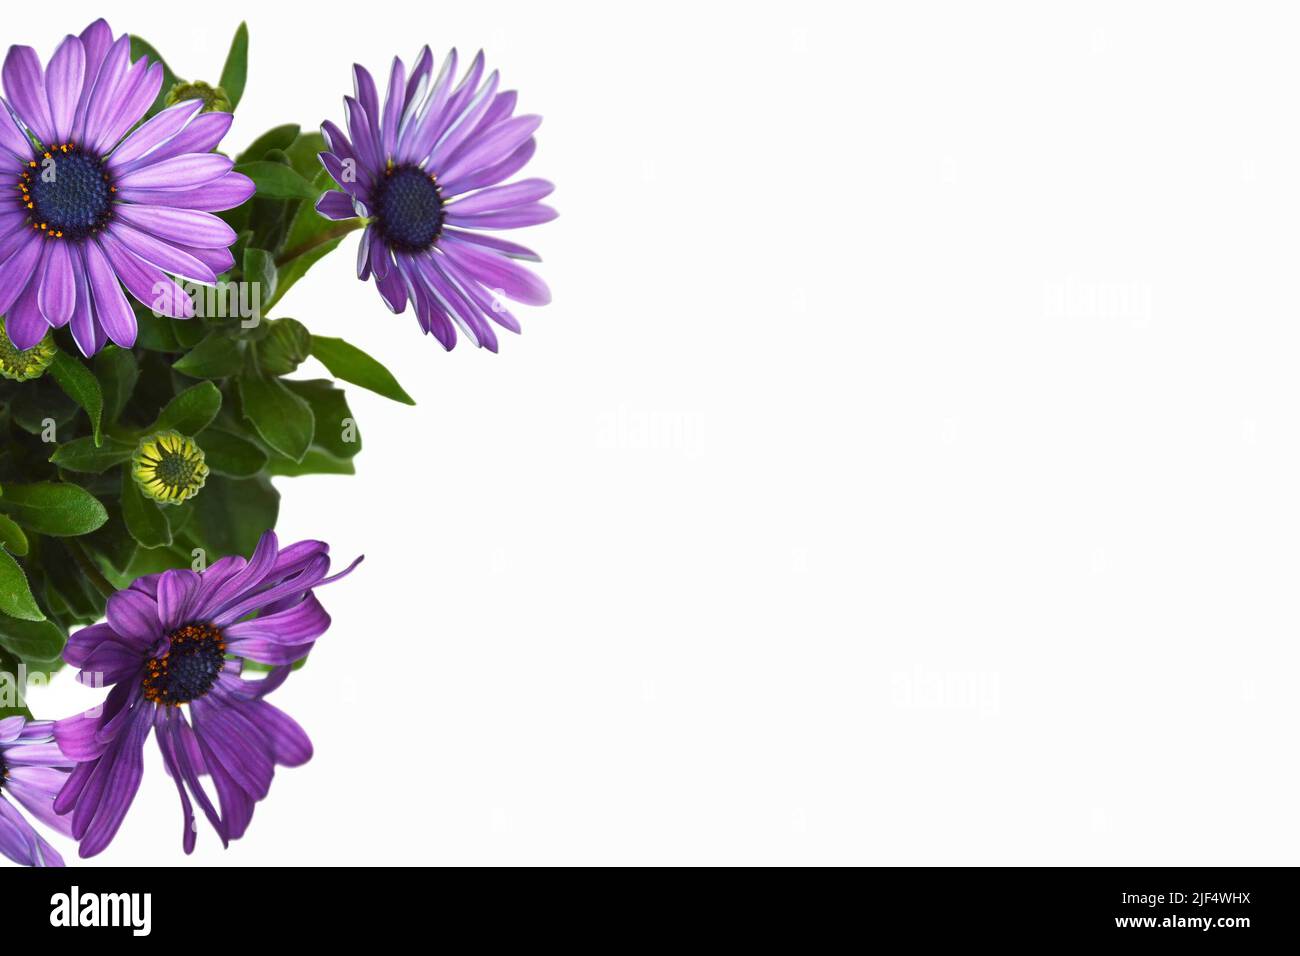 African daisies or Osteospermum isolated on white background with copy space Stock Photo